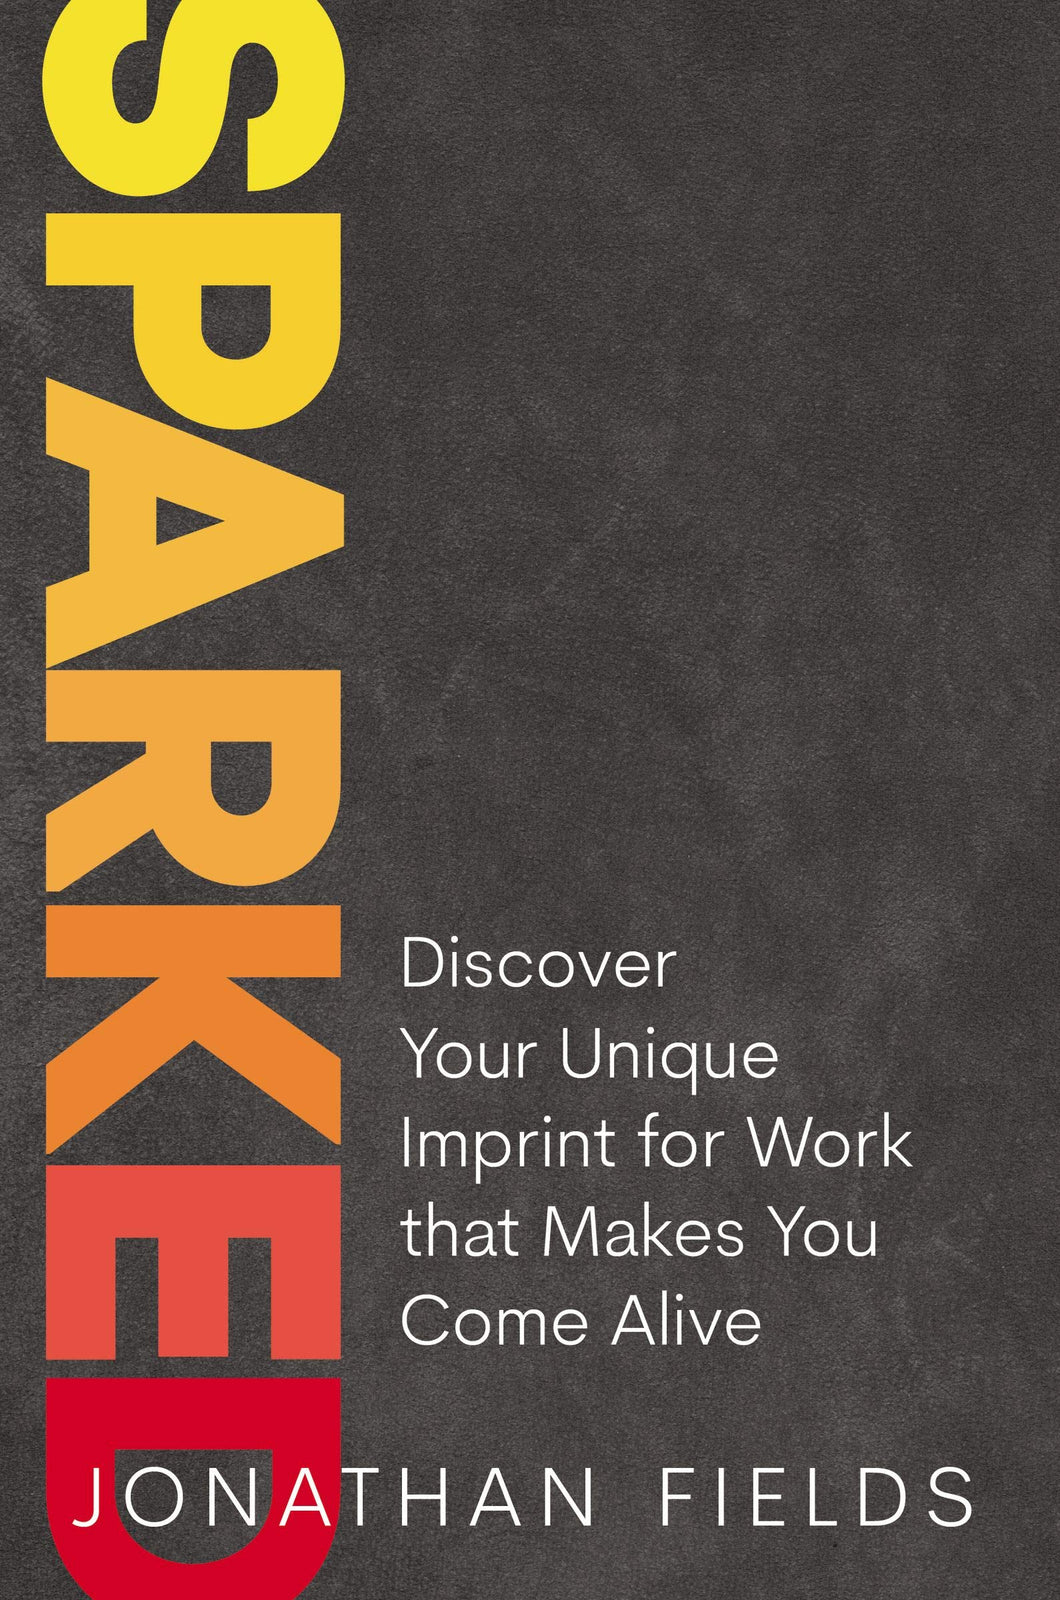 Sparked: Discover Your Unique Imprint For Work That Makes You Come Alive [Jonathan Fields]